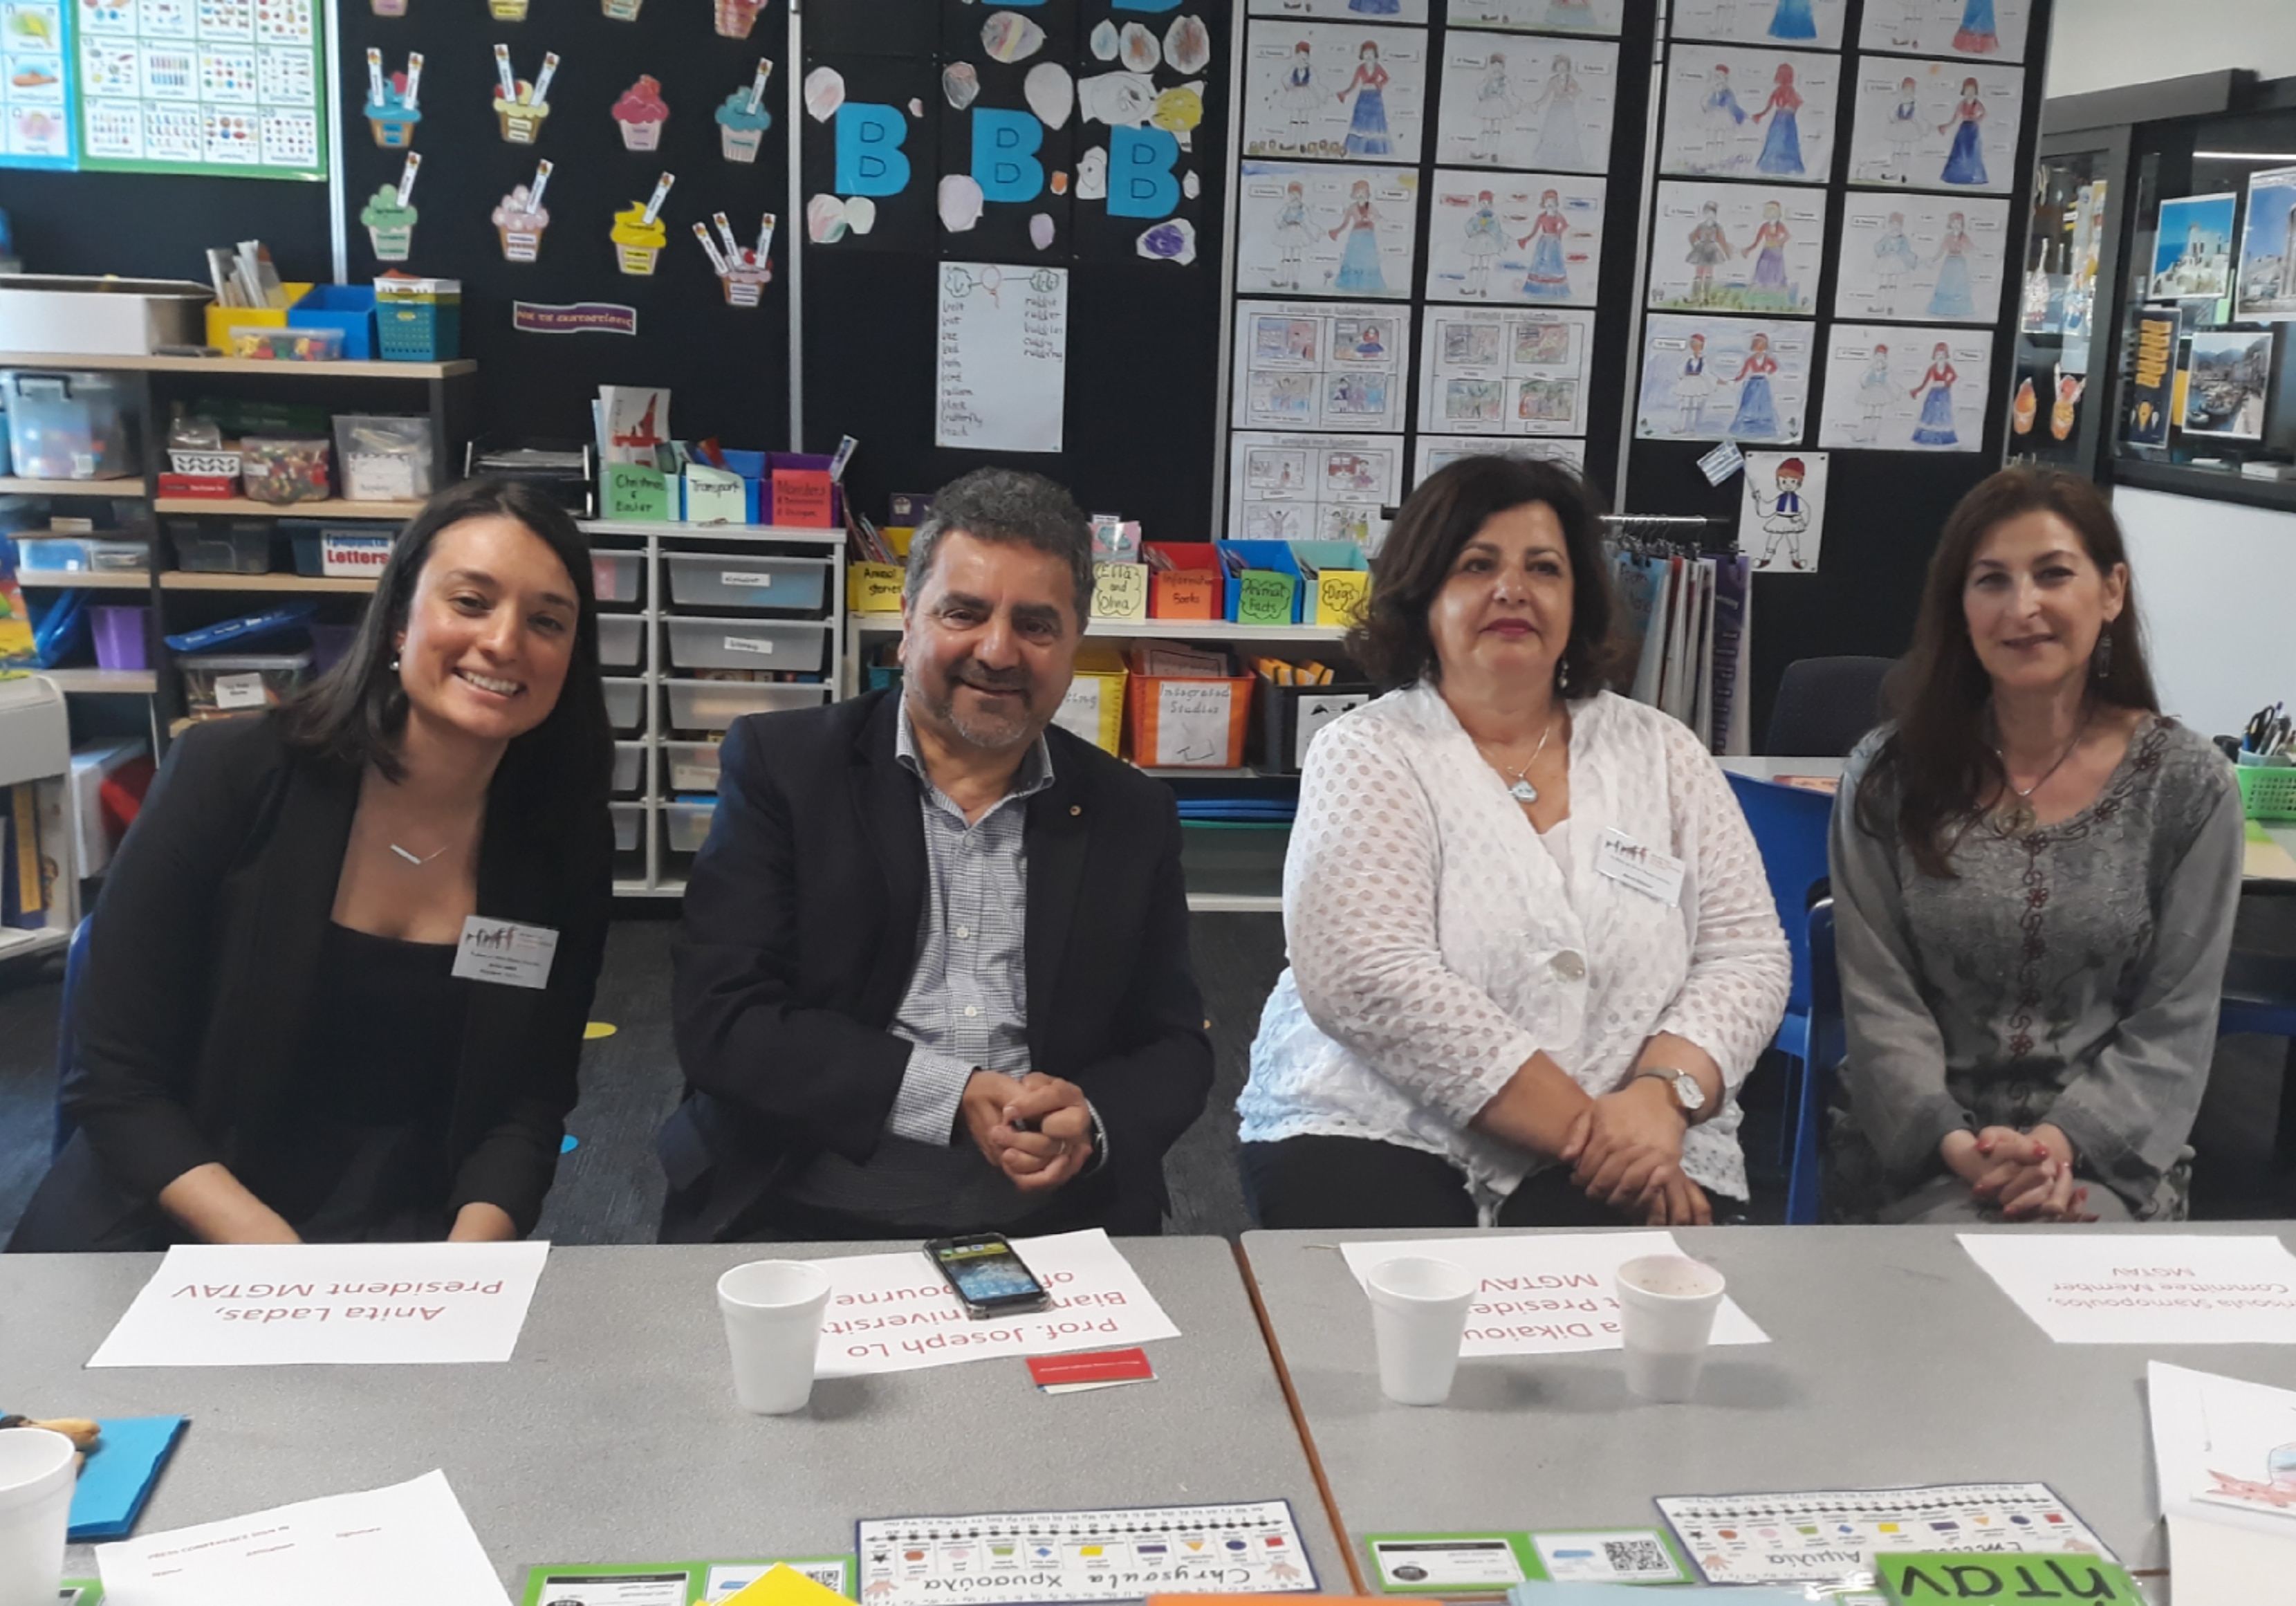 The MGTAV Research Launch took place on the 23rd of February 2020 at Lalor North Primary School.